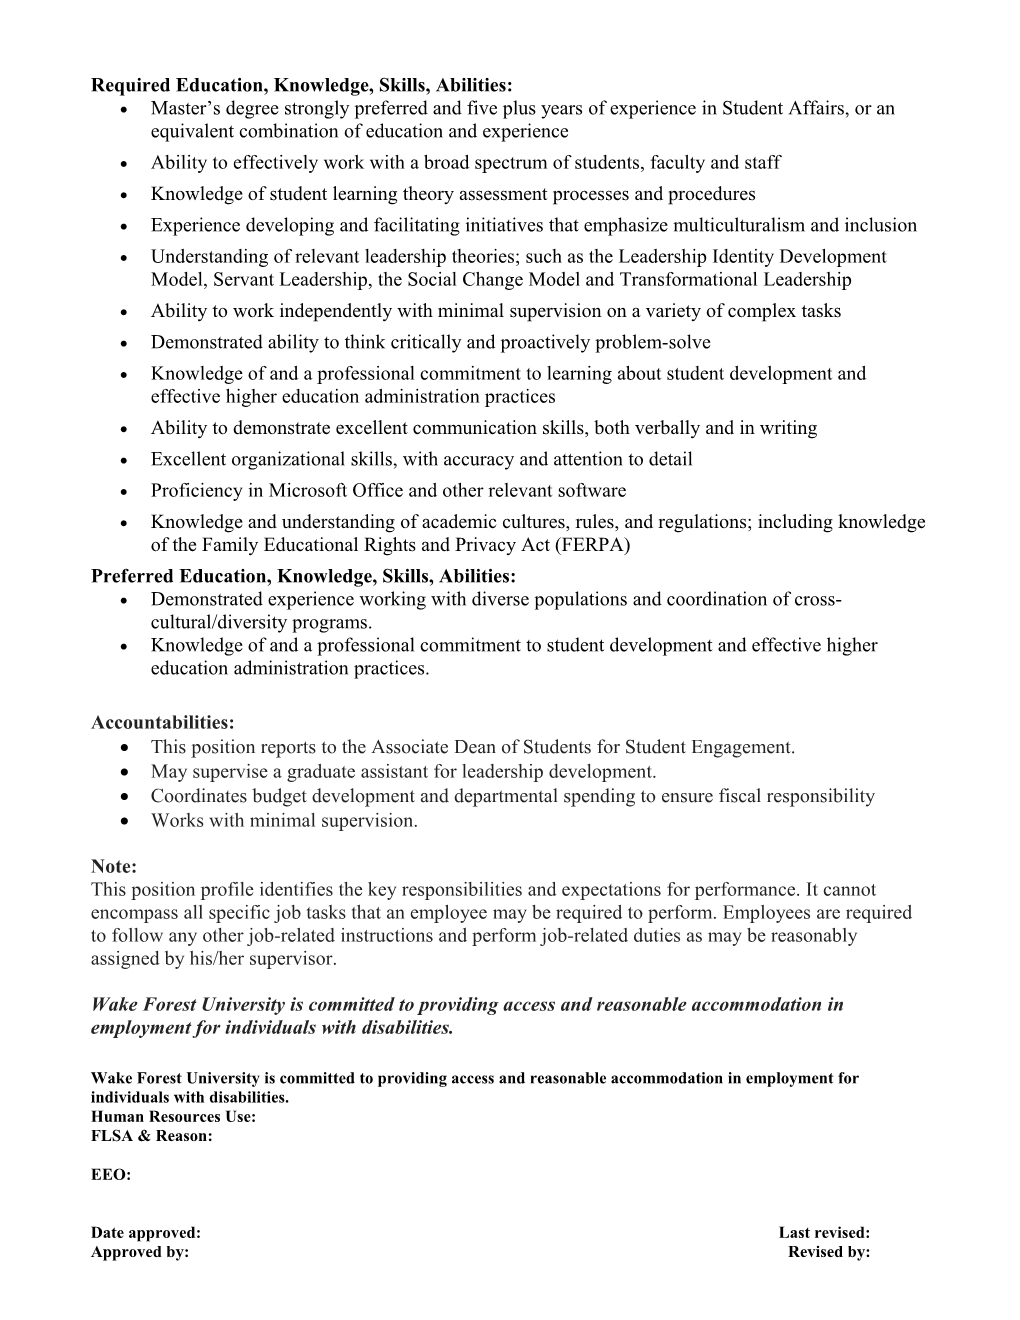 Job Title: Associate Director, Student Leadership and Engagement